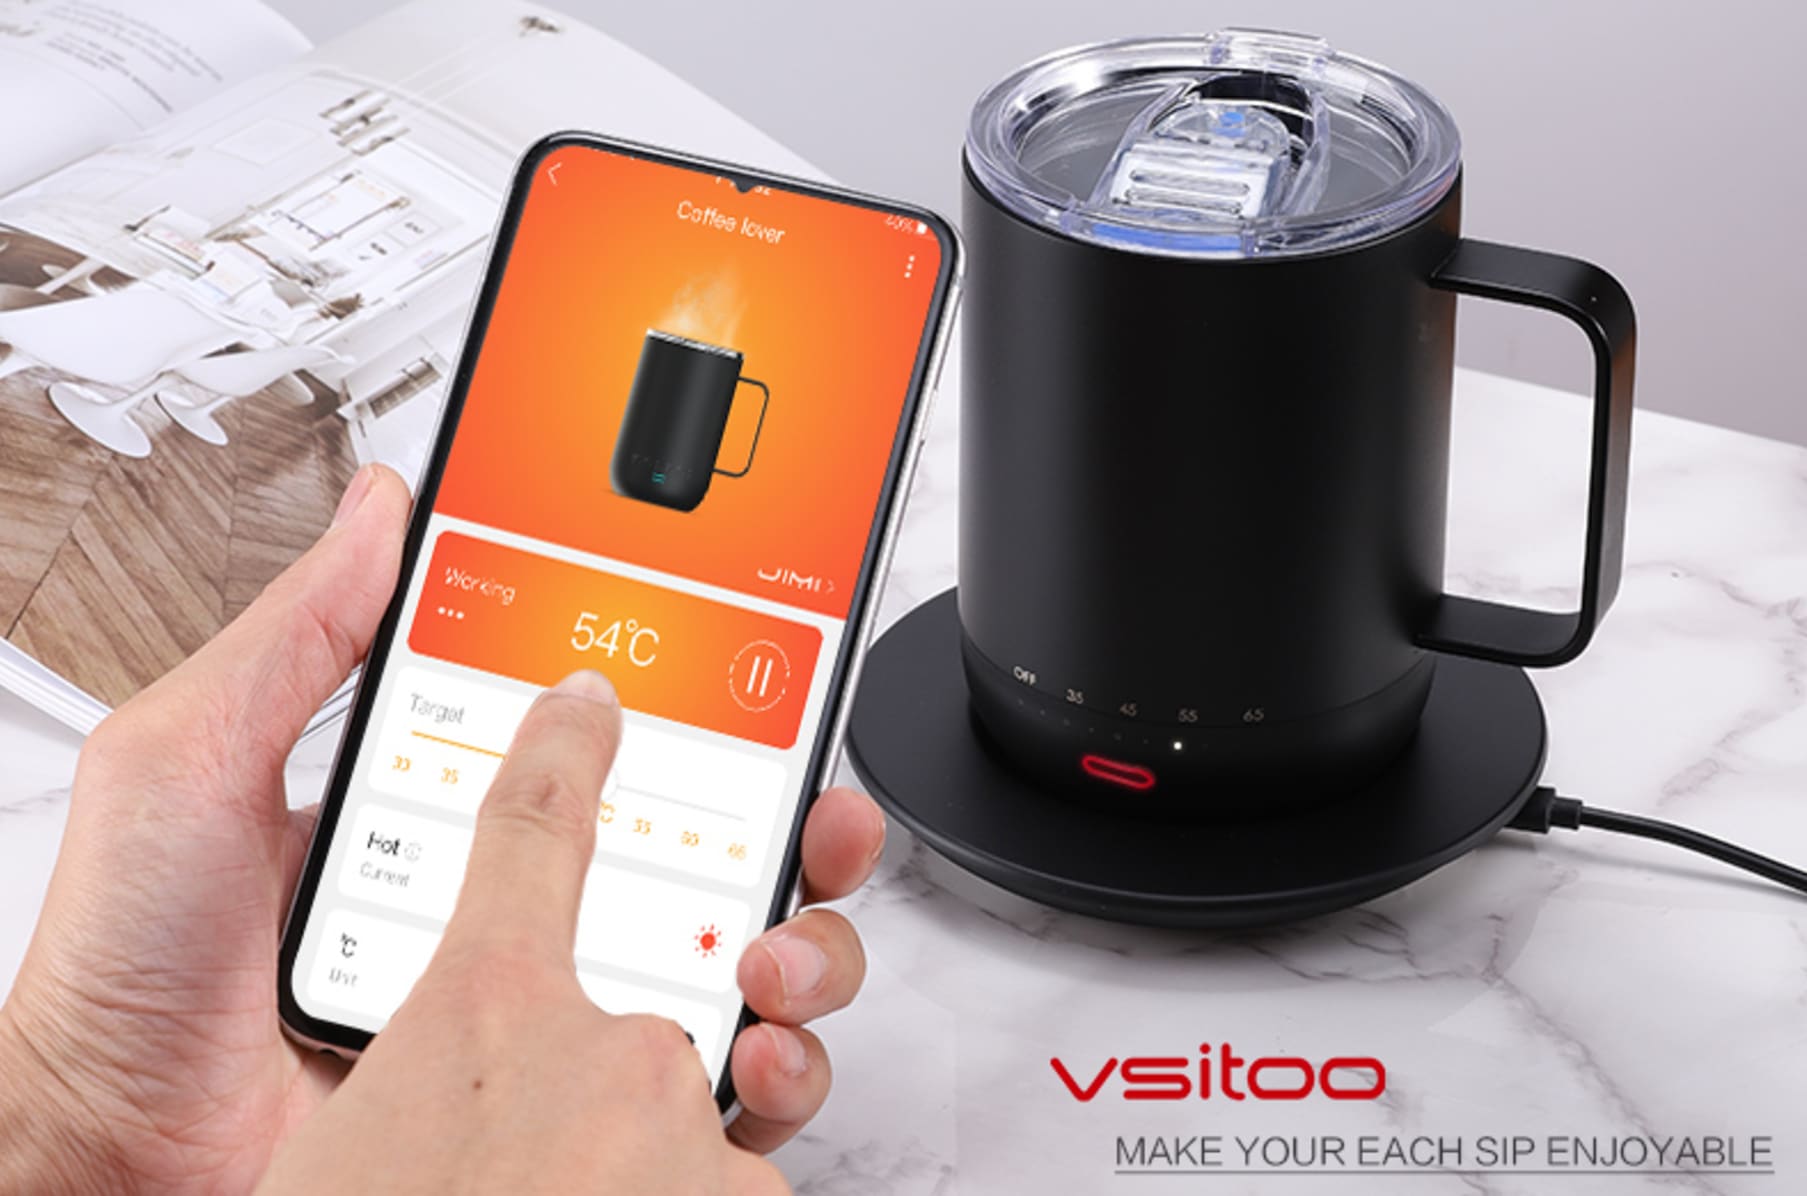 VSITOO Temperature Control Smart Mug 2 - Keep Your Coffee Hot All